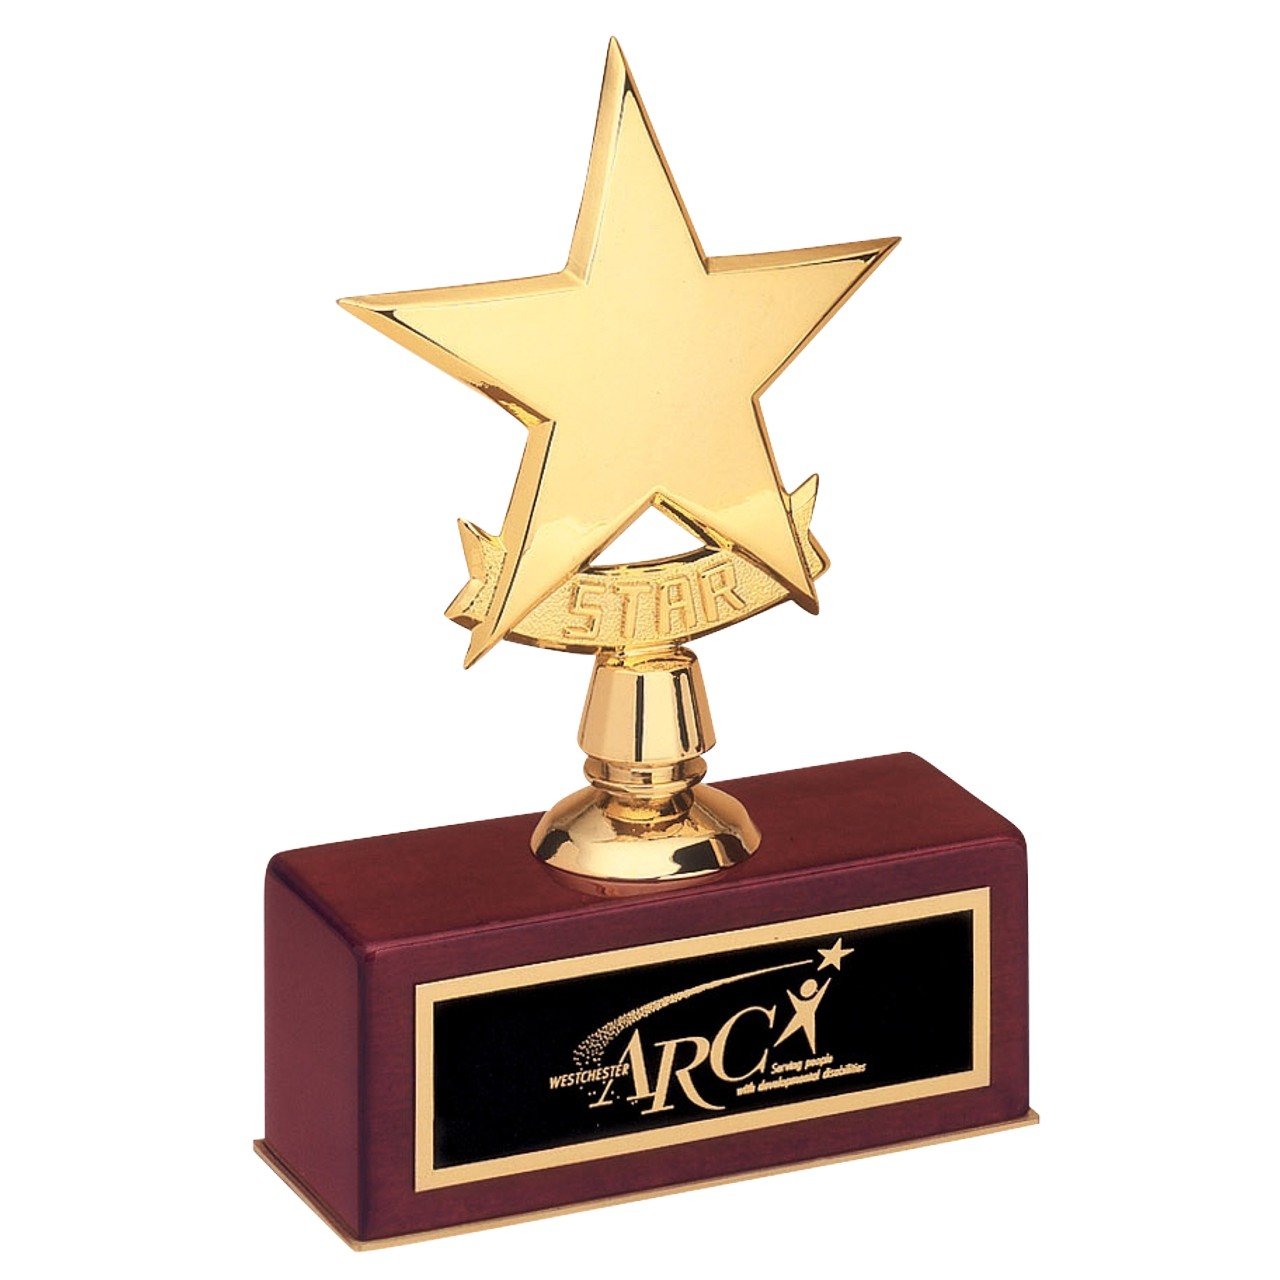 Crown Awards Green Megastar Trophies Personalized Star Recognition Trophy Your Own Engraving Included Prime